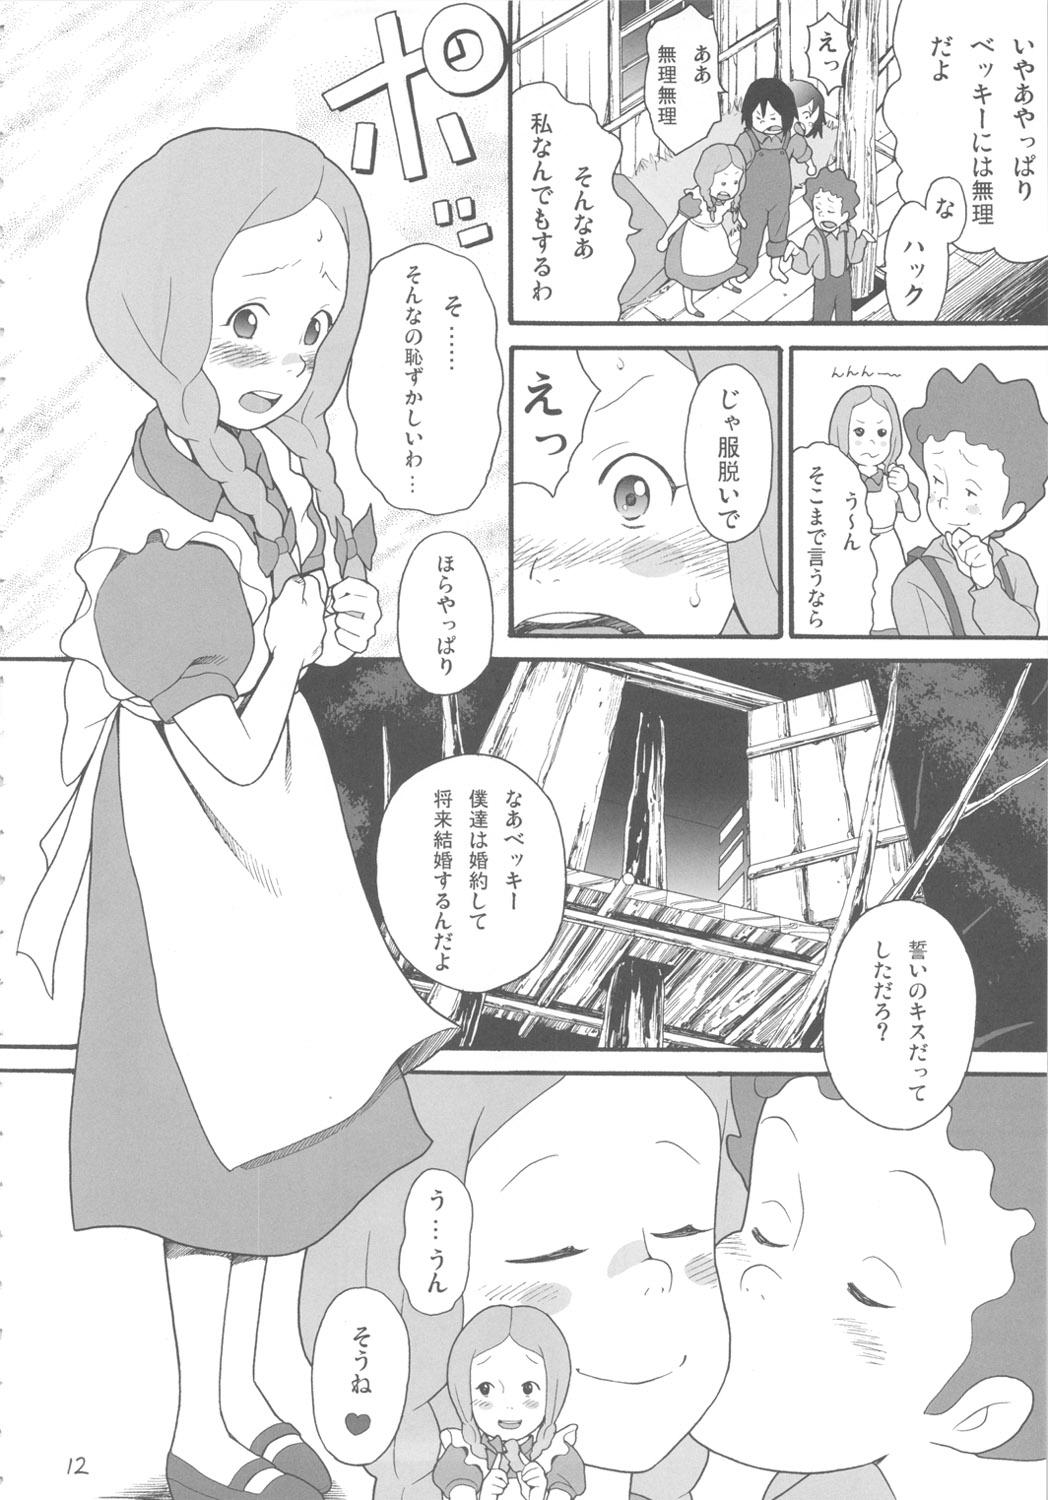 Reversecowgirl Hatch no Meisaku Gekijou 11 - World masterpiece theater Tico of the seven seas Lucy of the southern rainbow The adventures of tom sawyer Les miserables shoujo cosette Ffm - Page 11